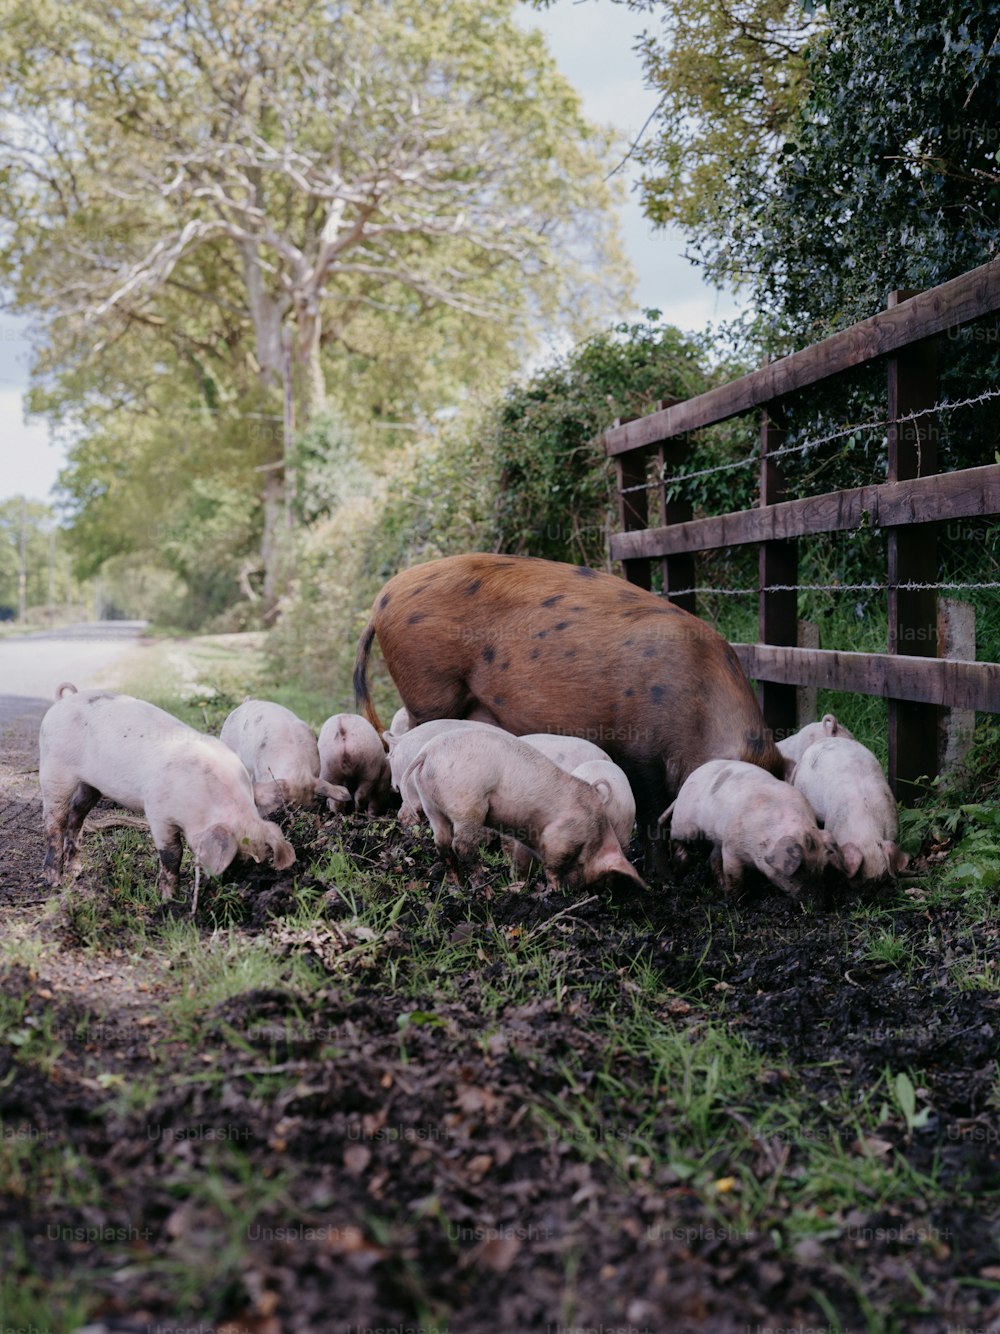 a pig and her baby pigs in a fenced in area